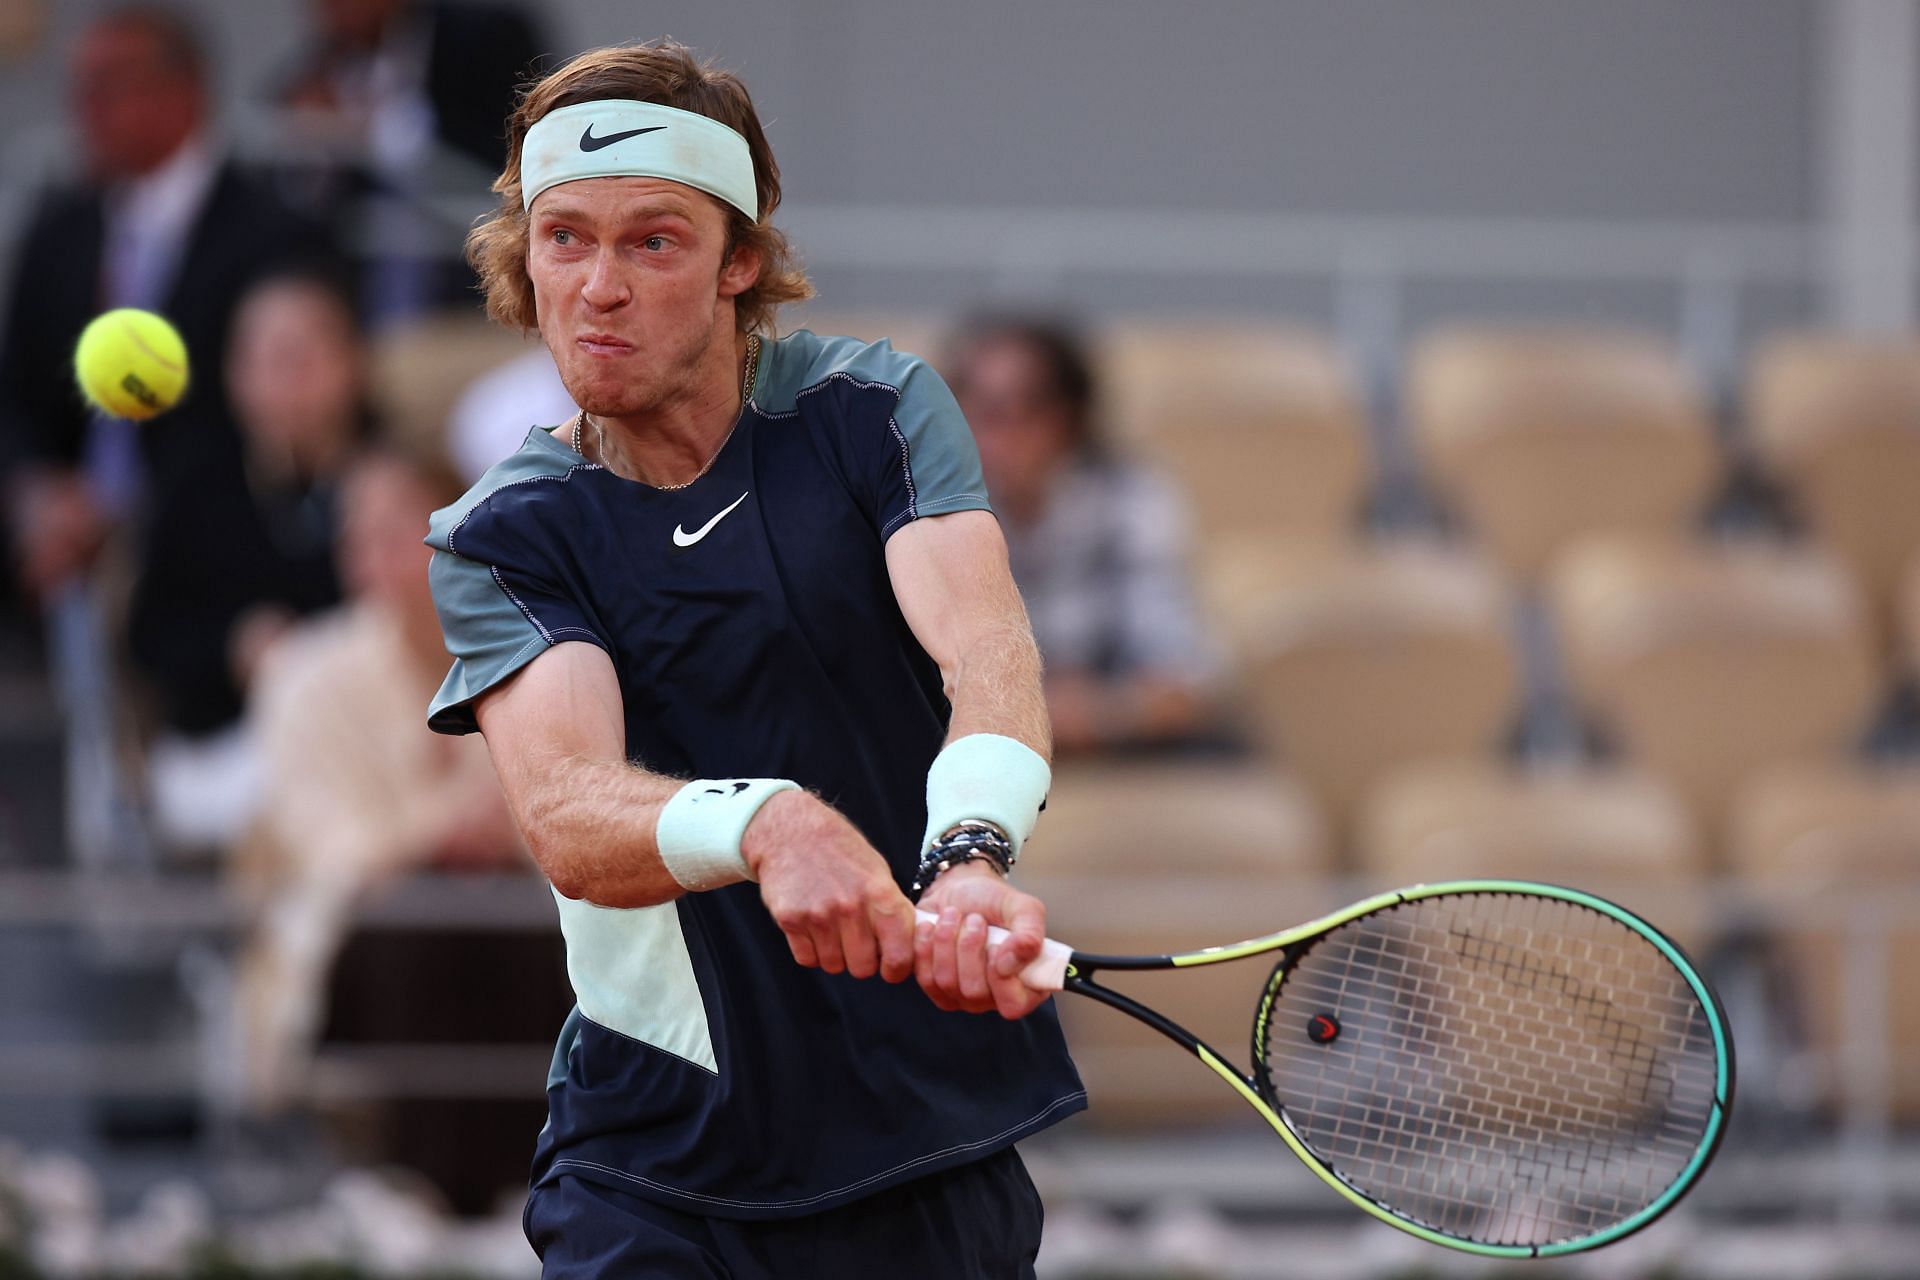 Rublev has not won back-to-back matches since the 2022 French Open.